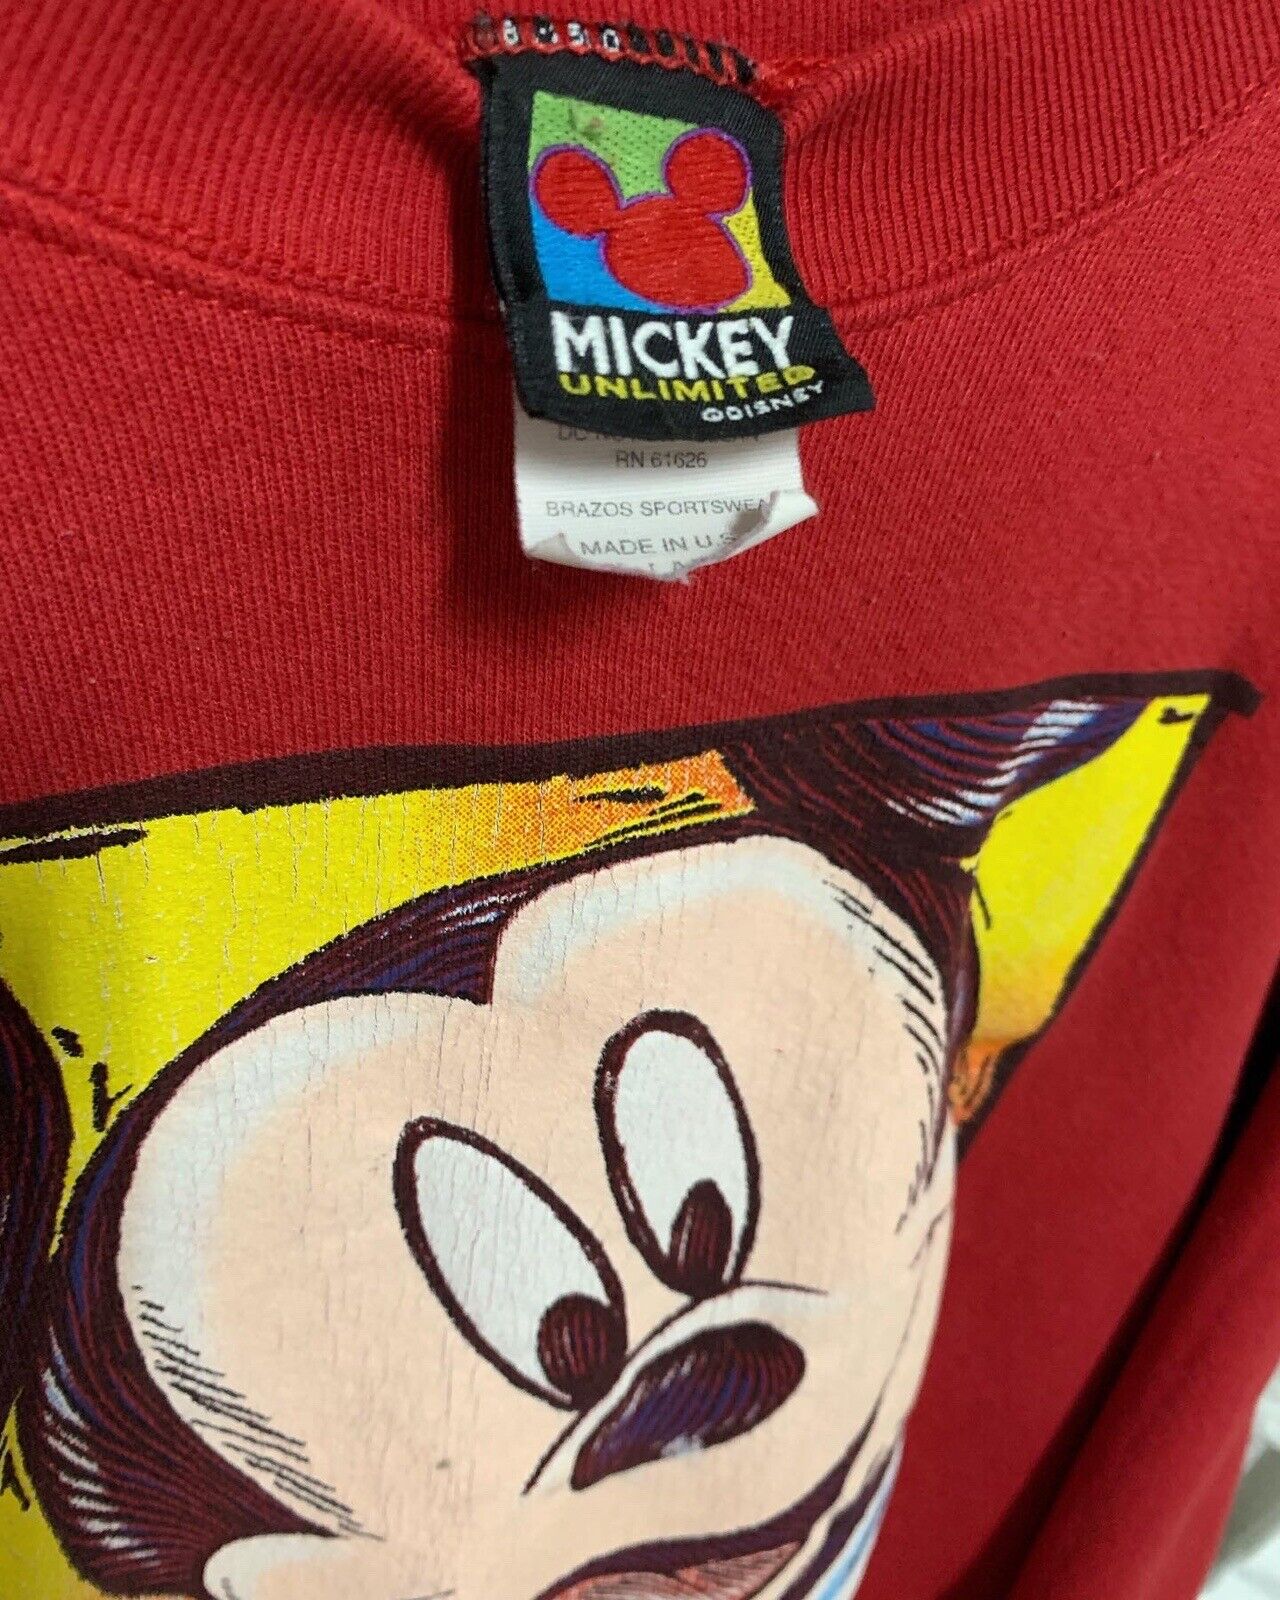 90s Mickey Mouse Vintage sweater - image 4